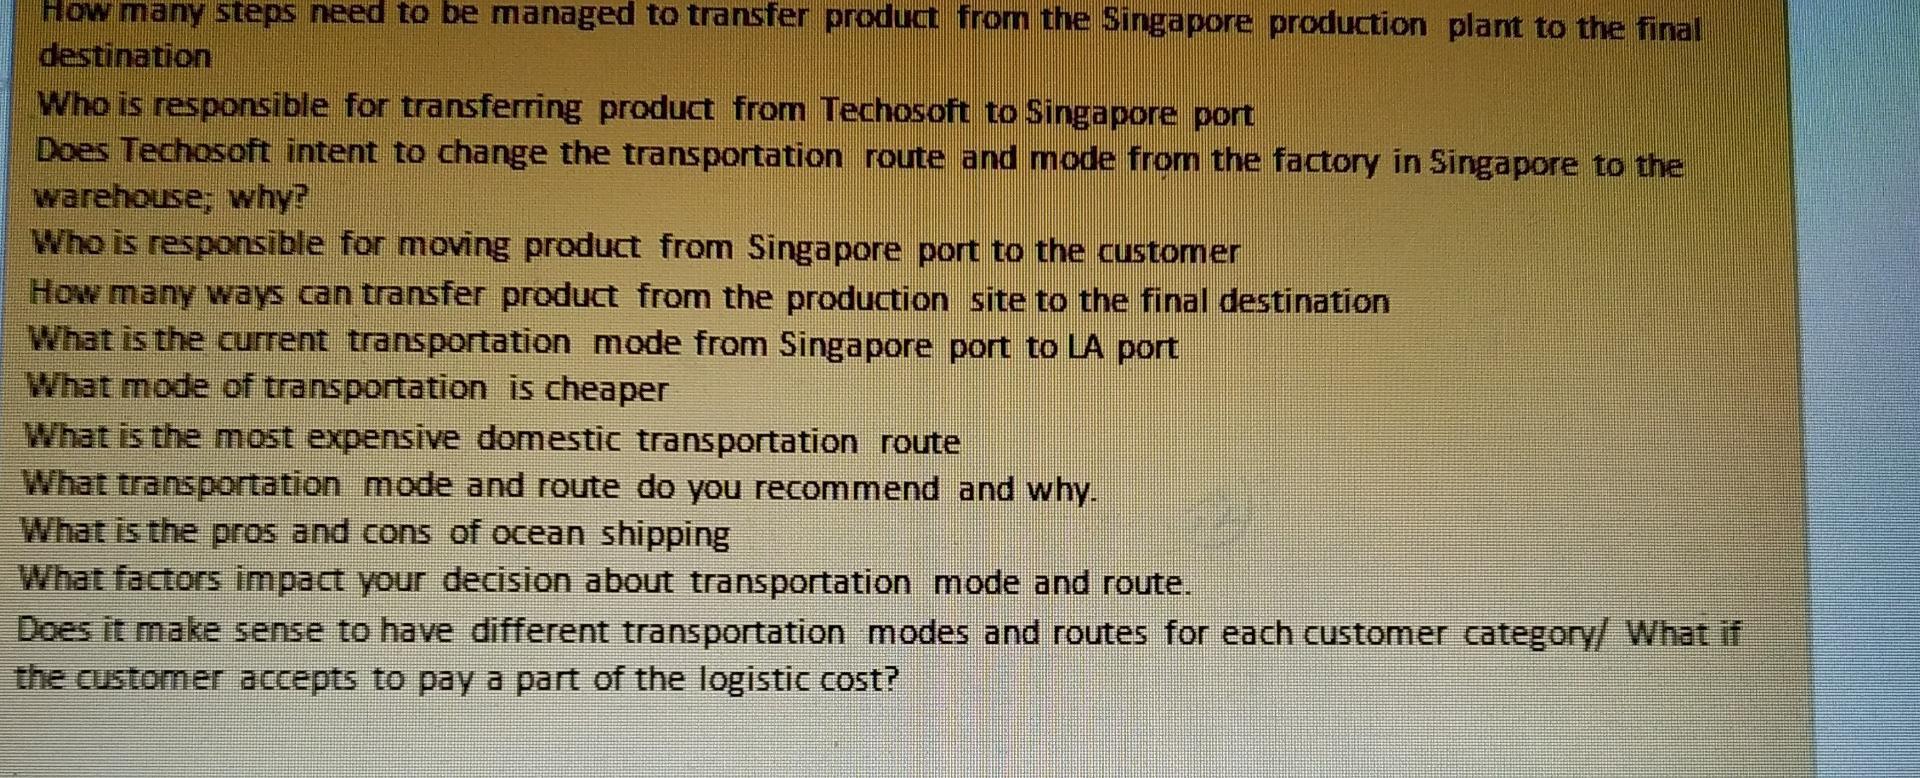 How many steps need to be managed to transfer product from the Singapore production plant to the finaldestinationWho is res